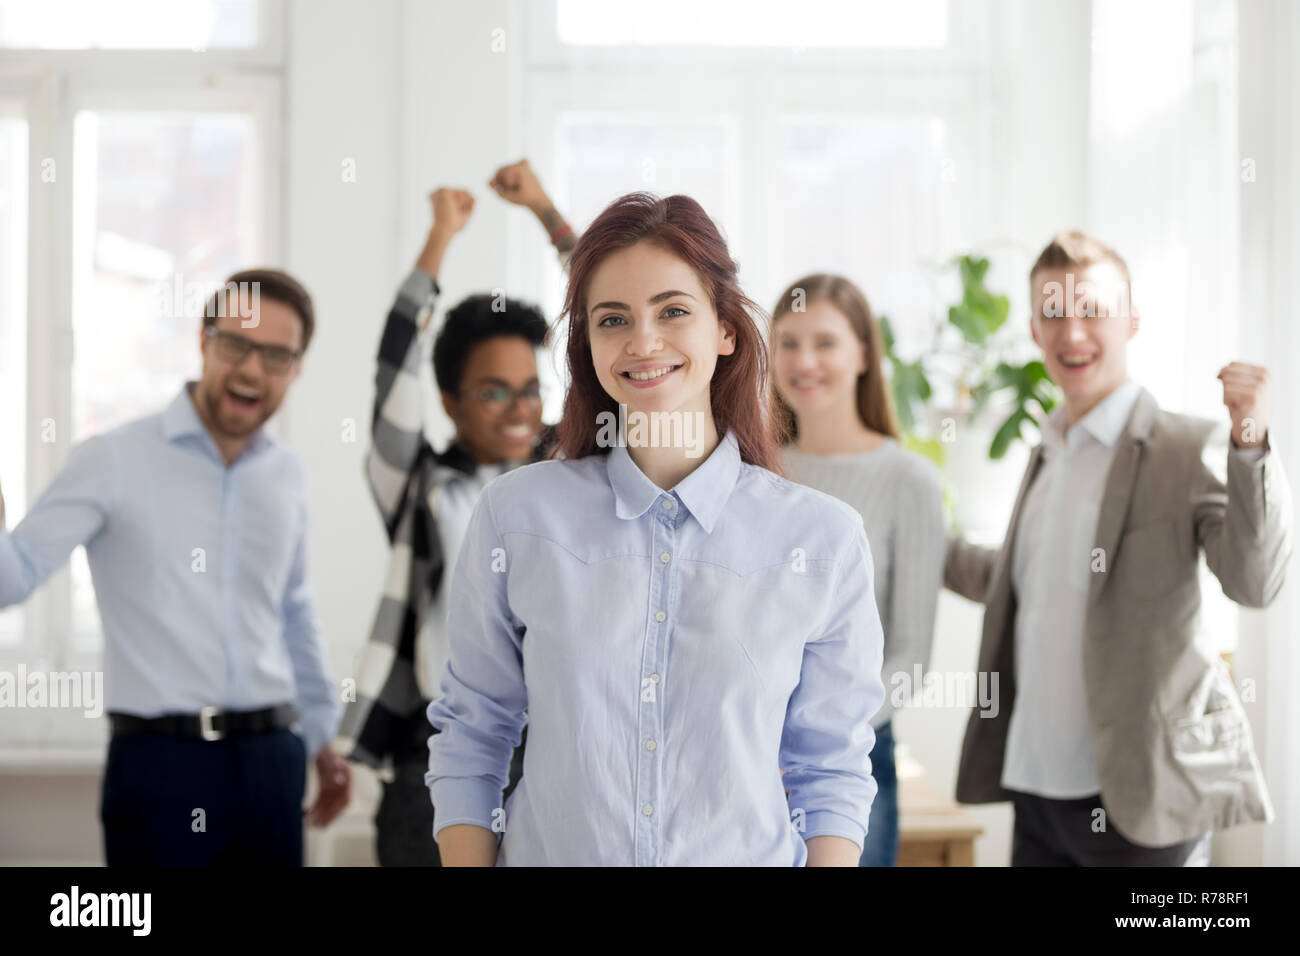 Portrait of successful female employee with excited colleagues a Stock Photo